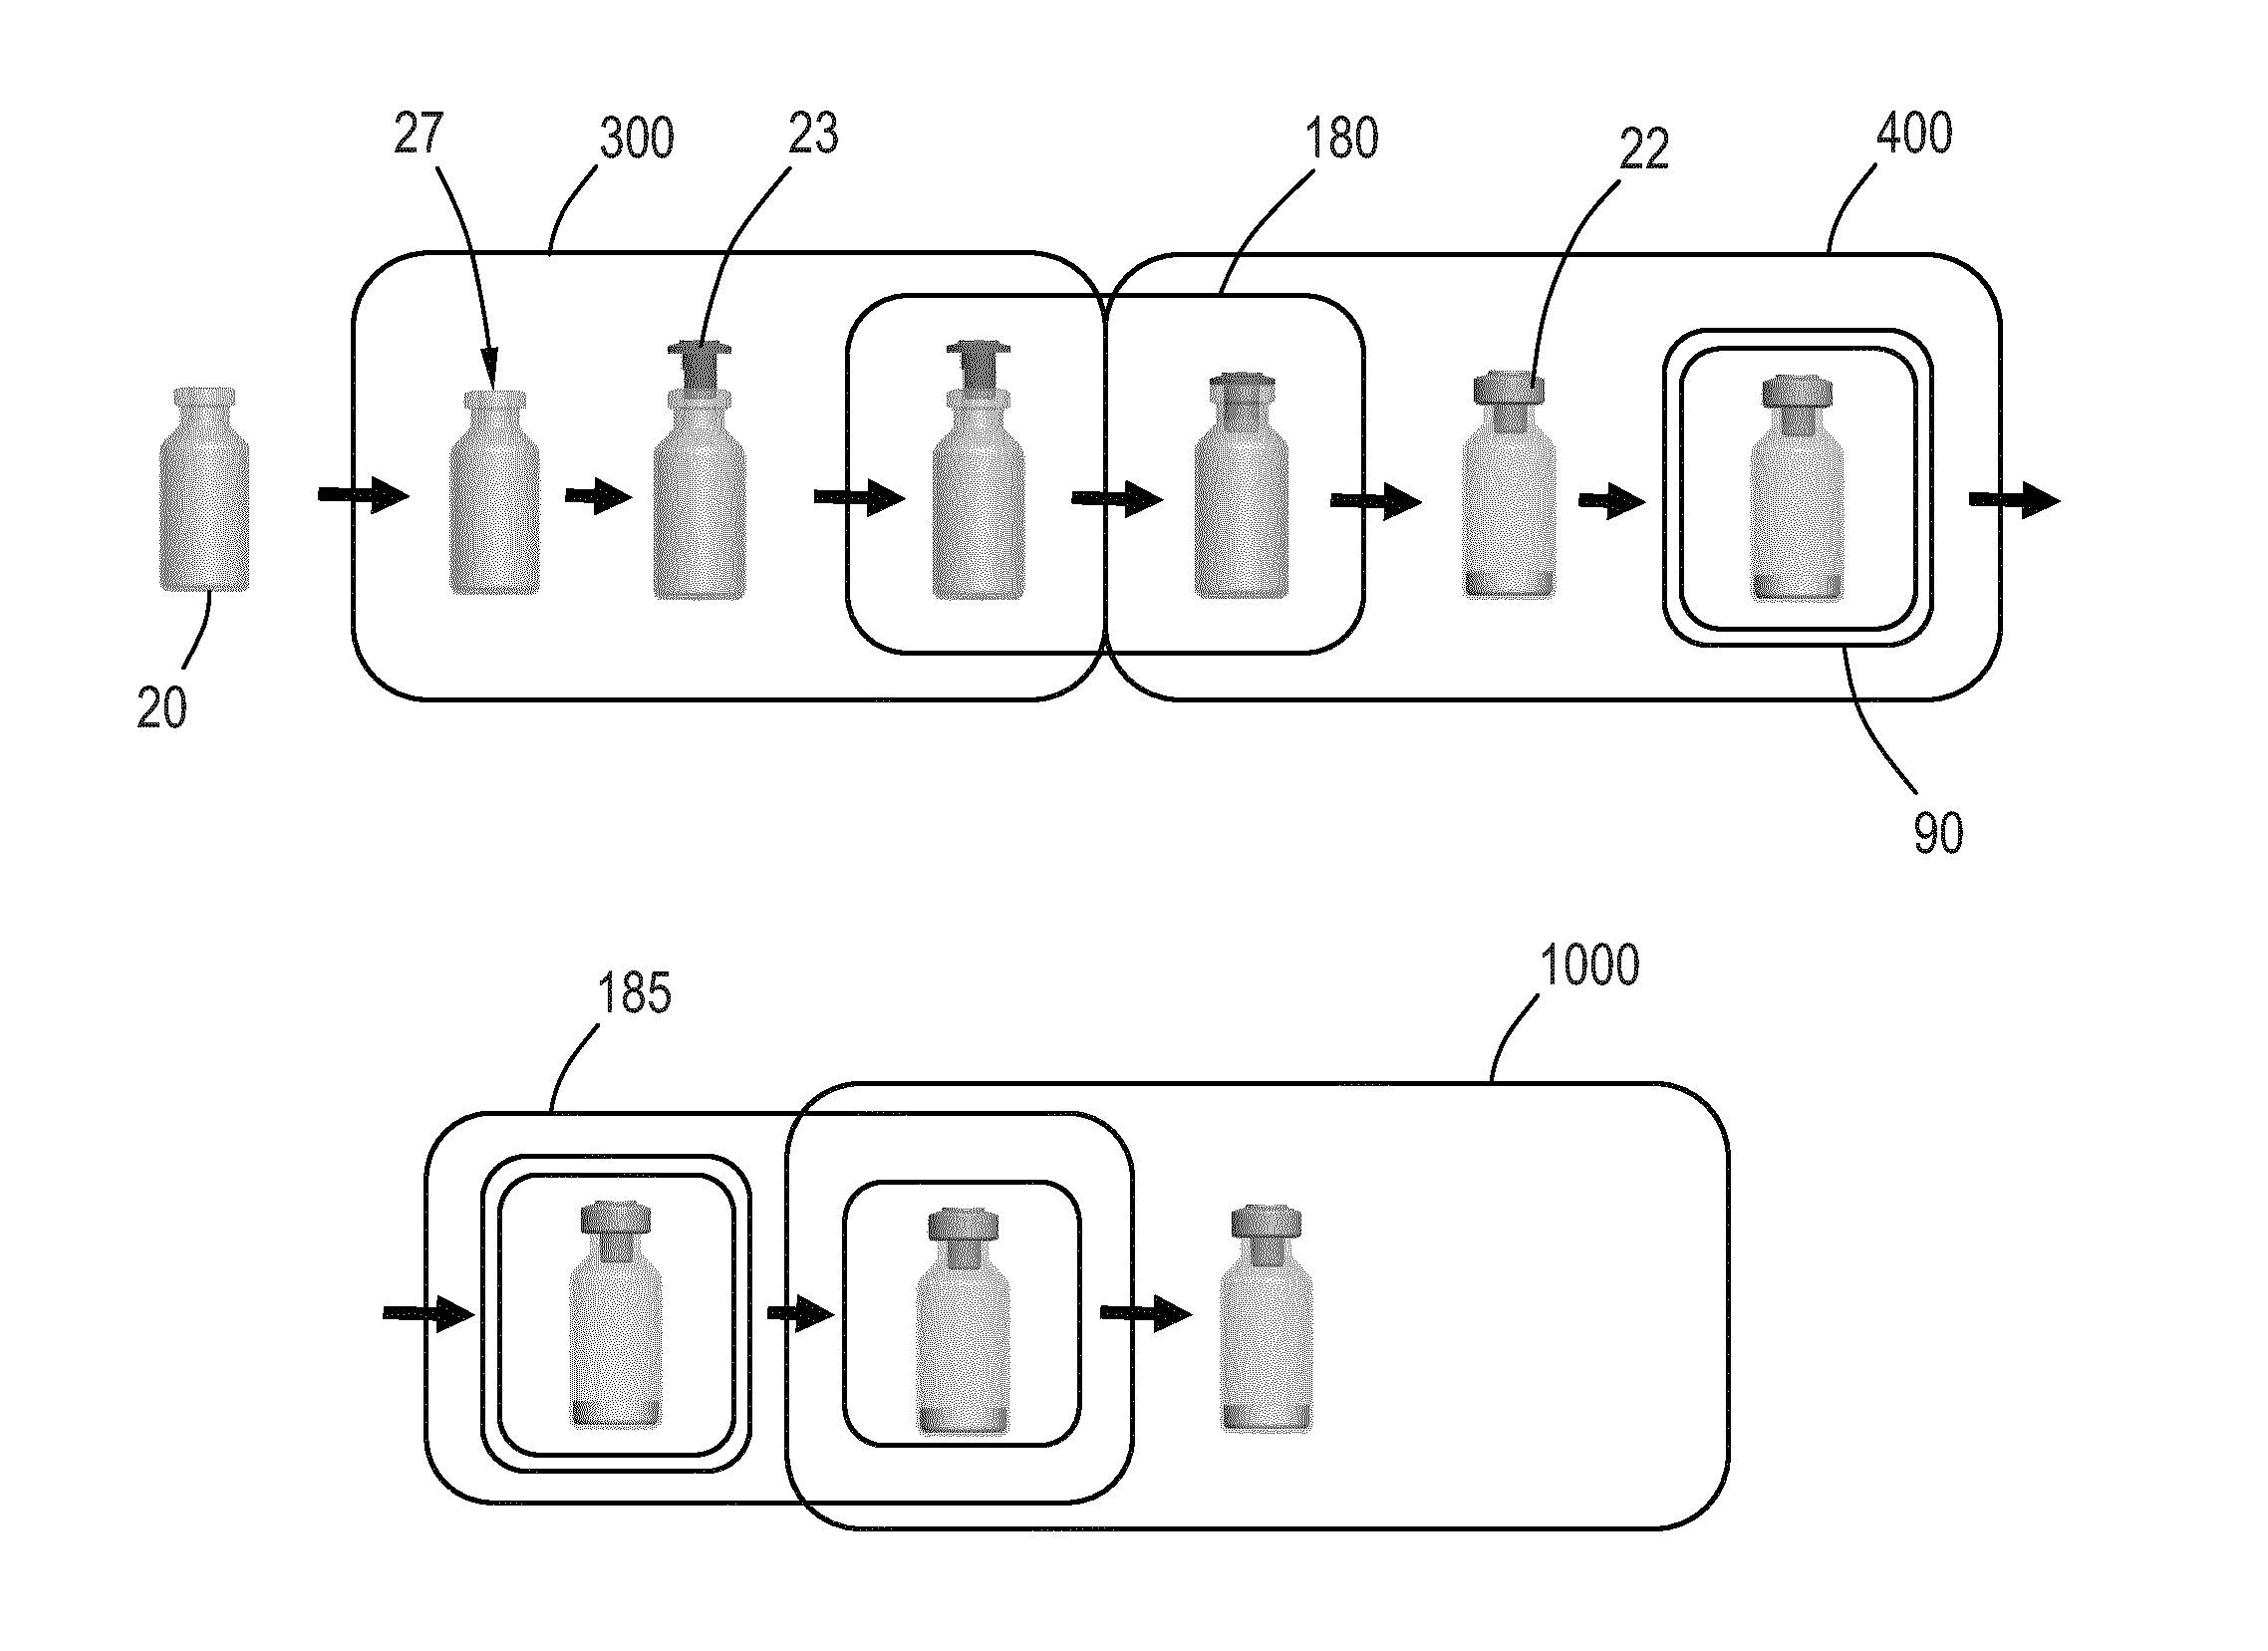 Method of Manufacturing a Medical Device